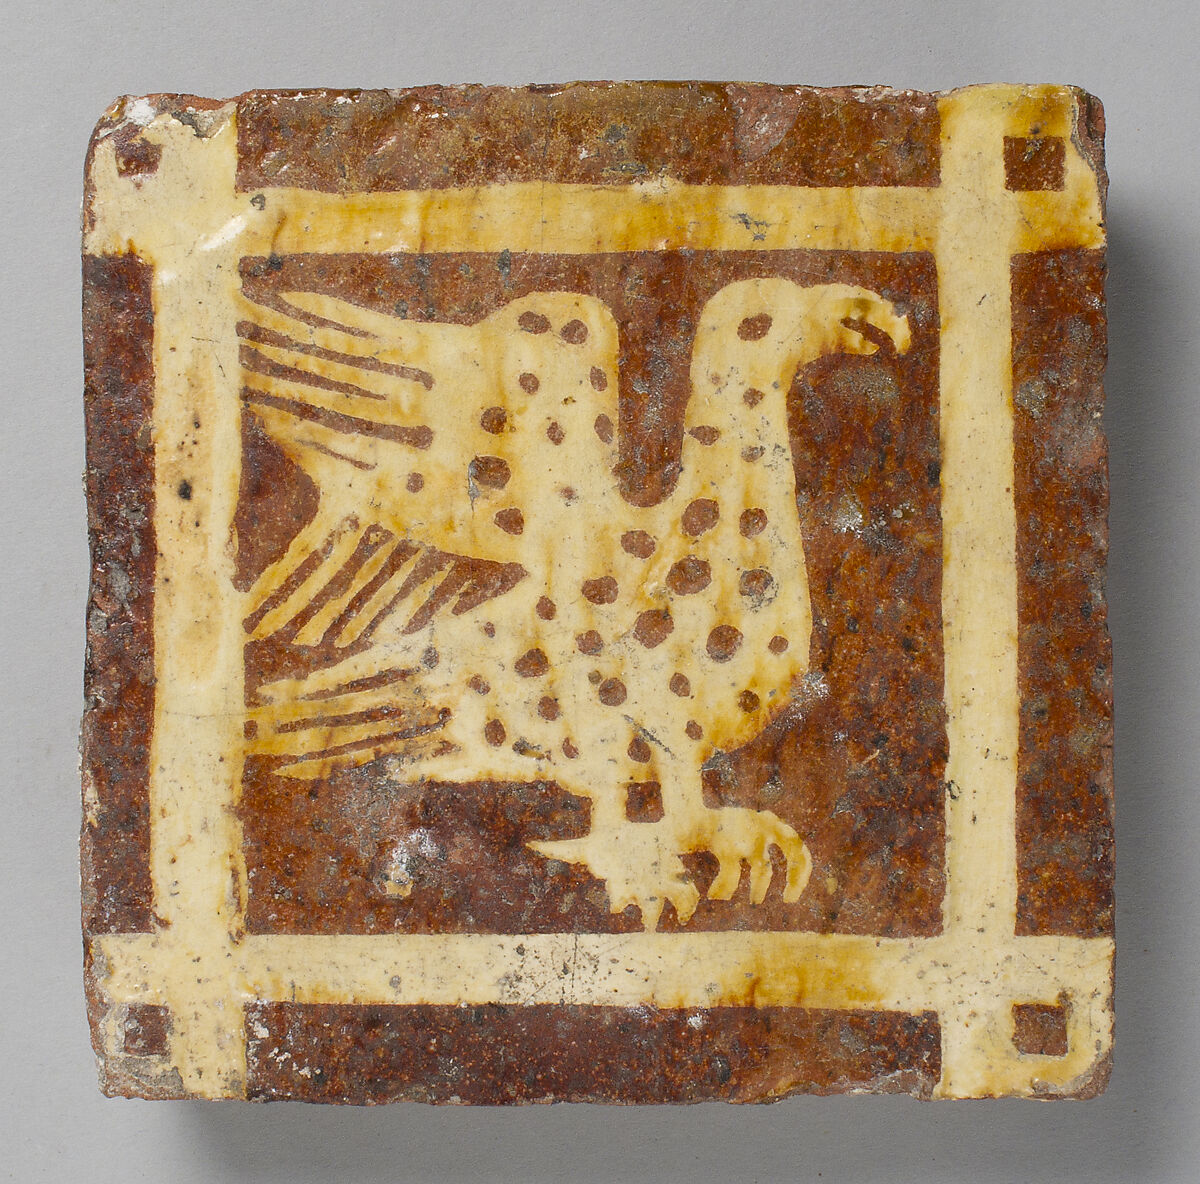 Two-Colored Tile, Fired earthenware with slip decoration and lead glaze, British 